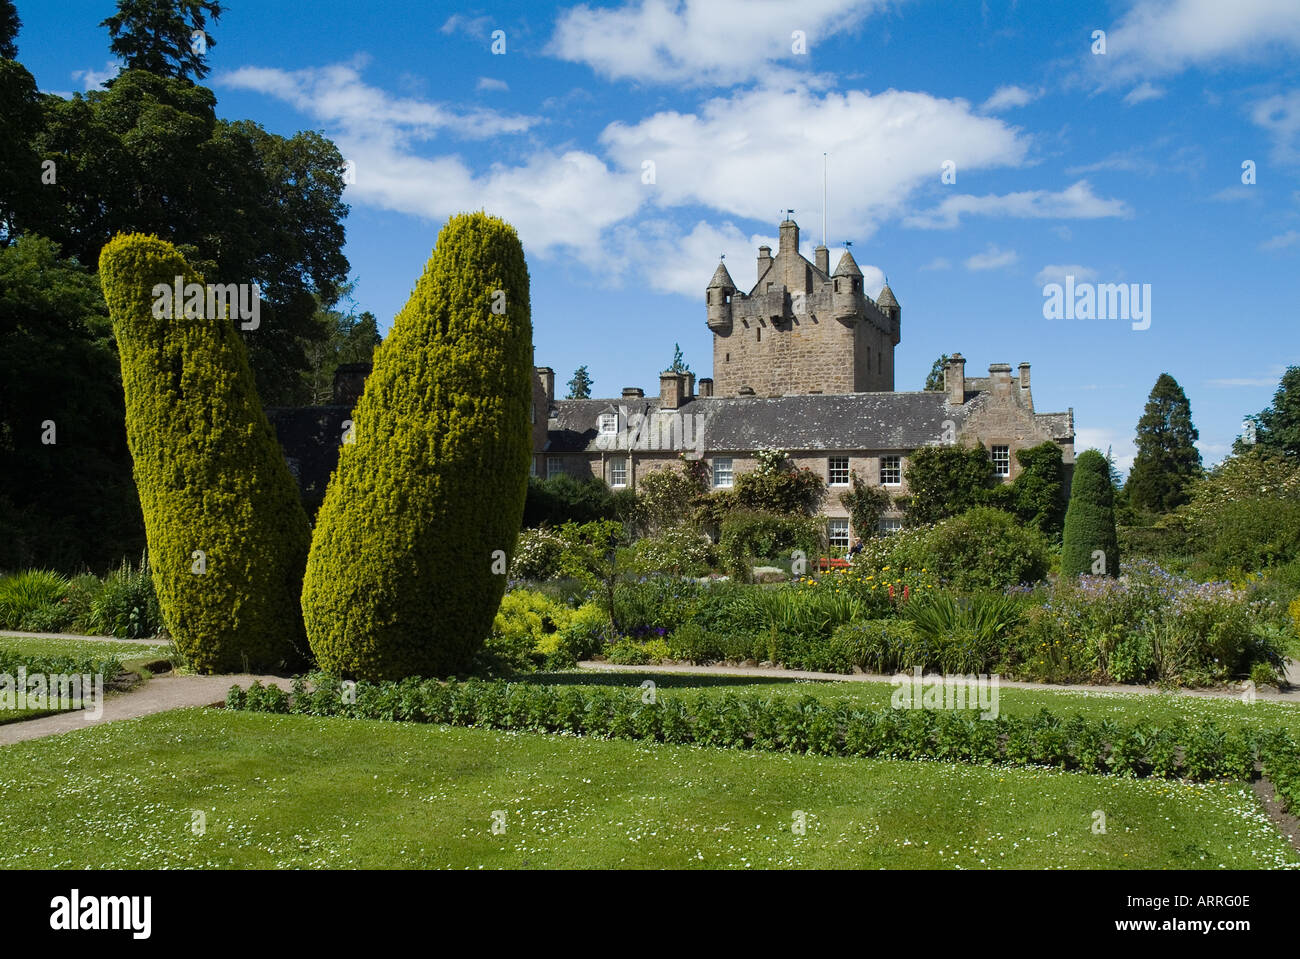 dh Tower house gardens Scotland CAWDOR CASTLE INVERNESSSHIRE Scottish Yew pillars tree hedge cottage garden highlands common taxus baccata uk Stock Photo